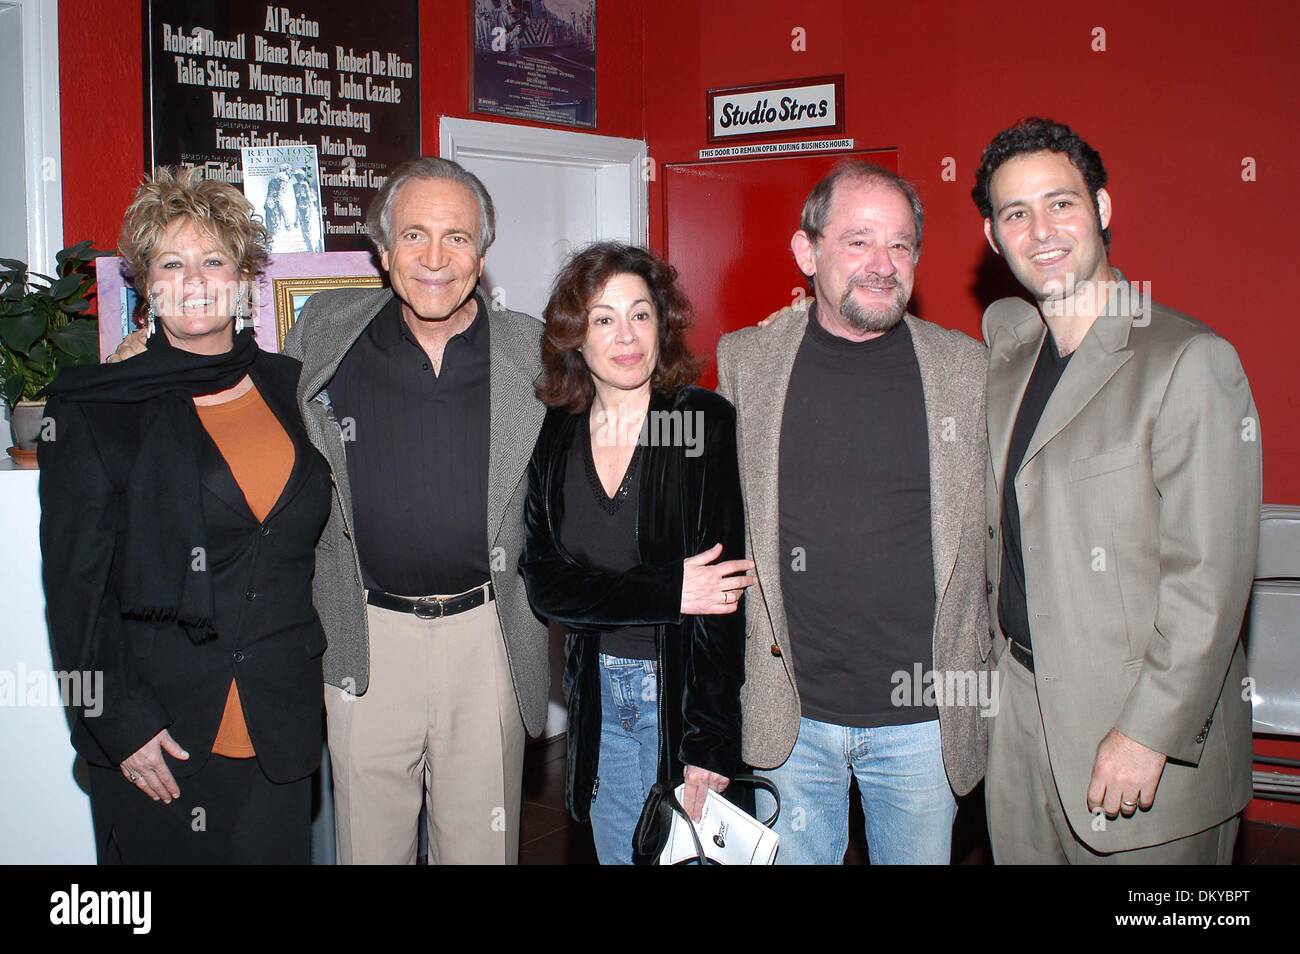 Mar. 26, 2002 - Hollywood, CALIFORNIA, USA - K28933TR.PLAY - REUNION IN  PRAGUE.LEE STRASBERG CREATIVE CENTER, HOLLYWOOD, CA.02/14/2003. TOM  RODRIGUEZ / 2003.CHRISTINE ANDERSON GROH WITH HUSBAND DAVID GROH, EILEN  KAGAN WITH HUSBAND